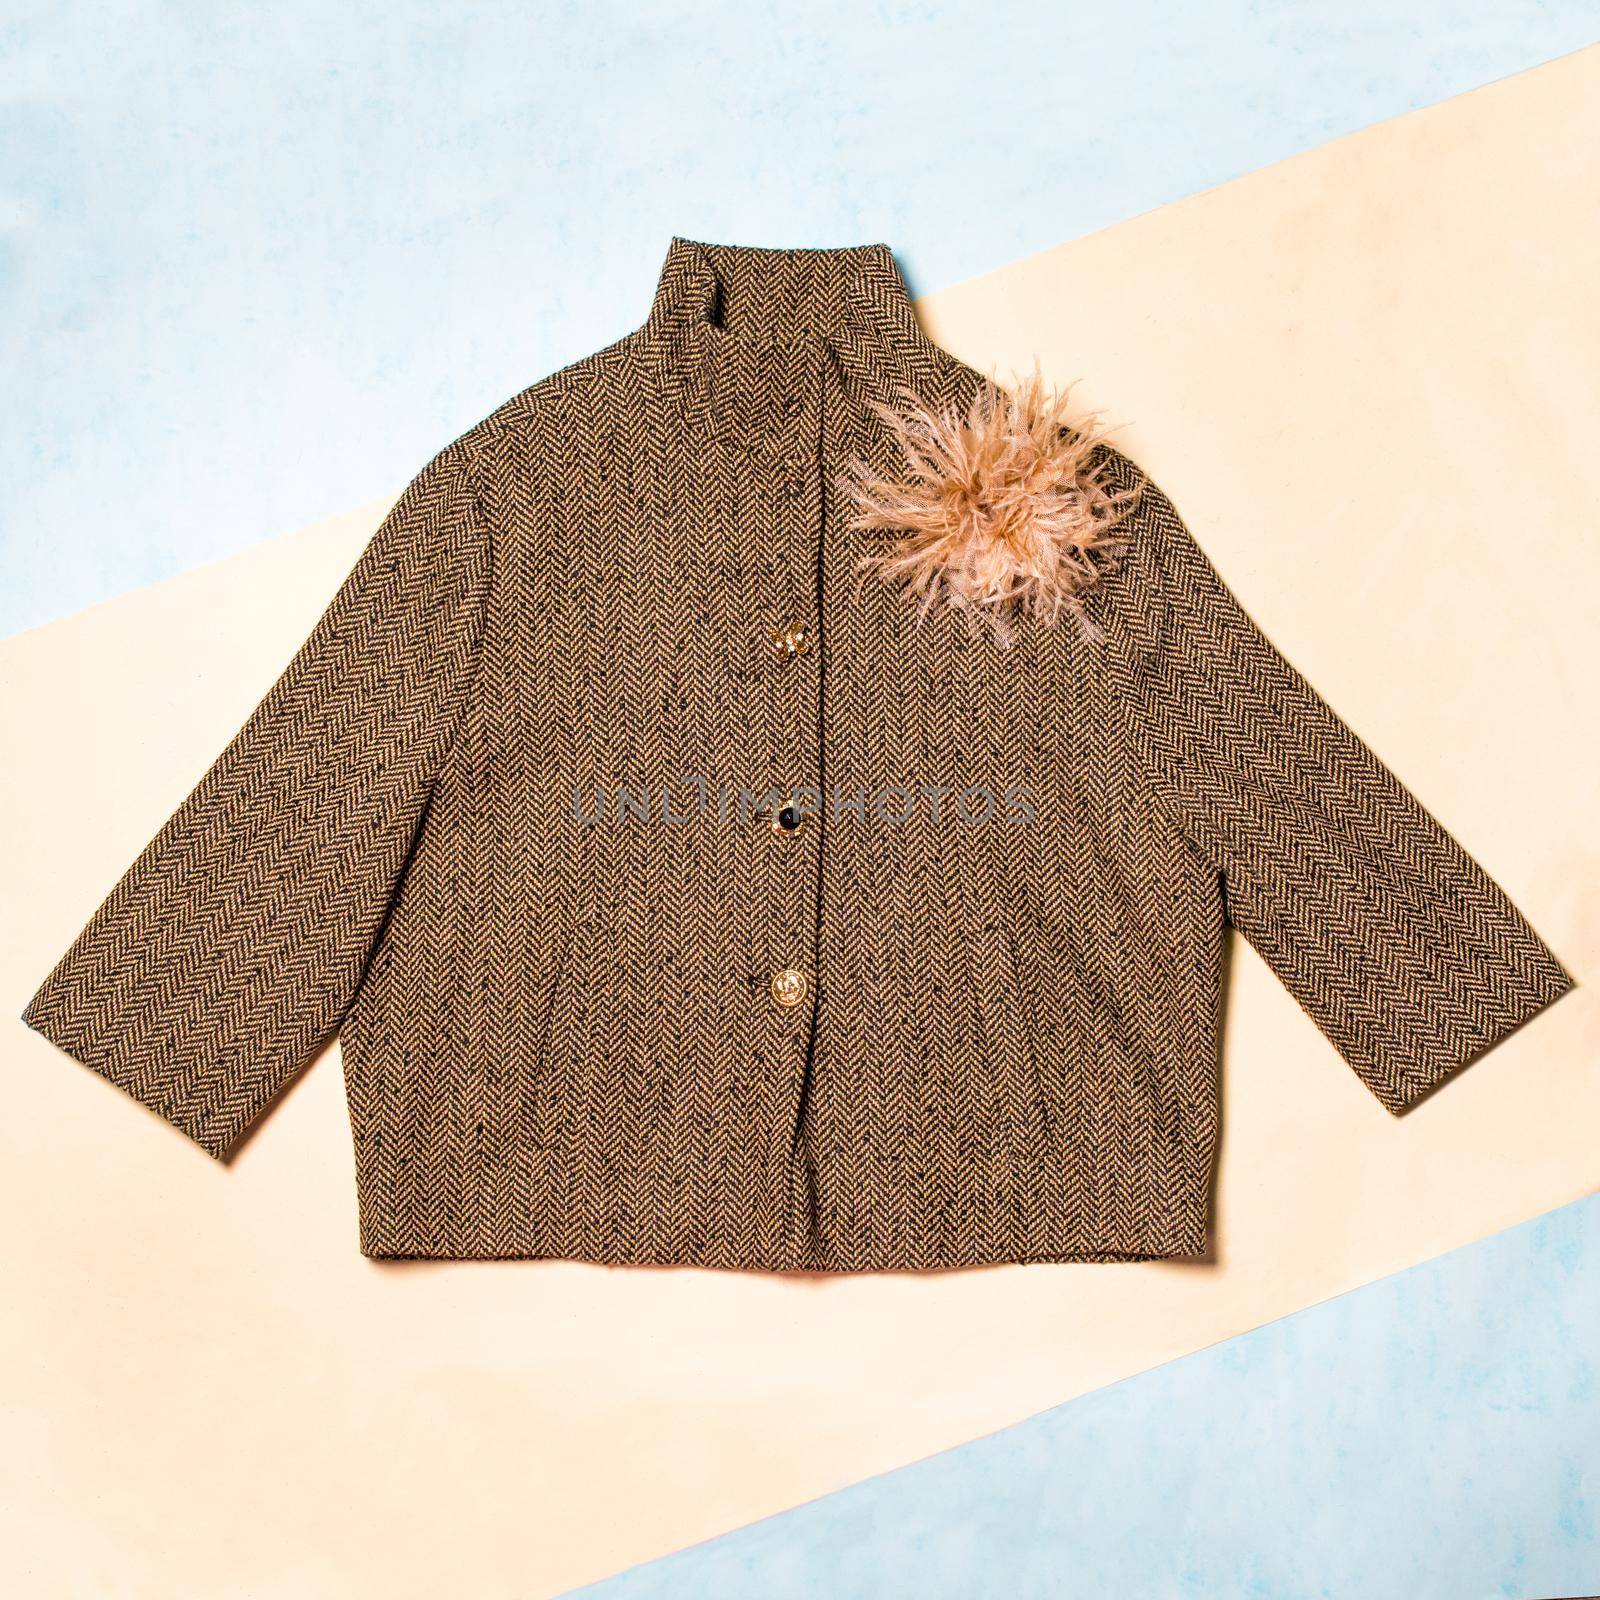 Brown color woman autumn coat isolated